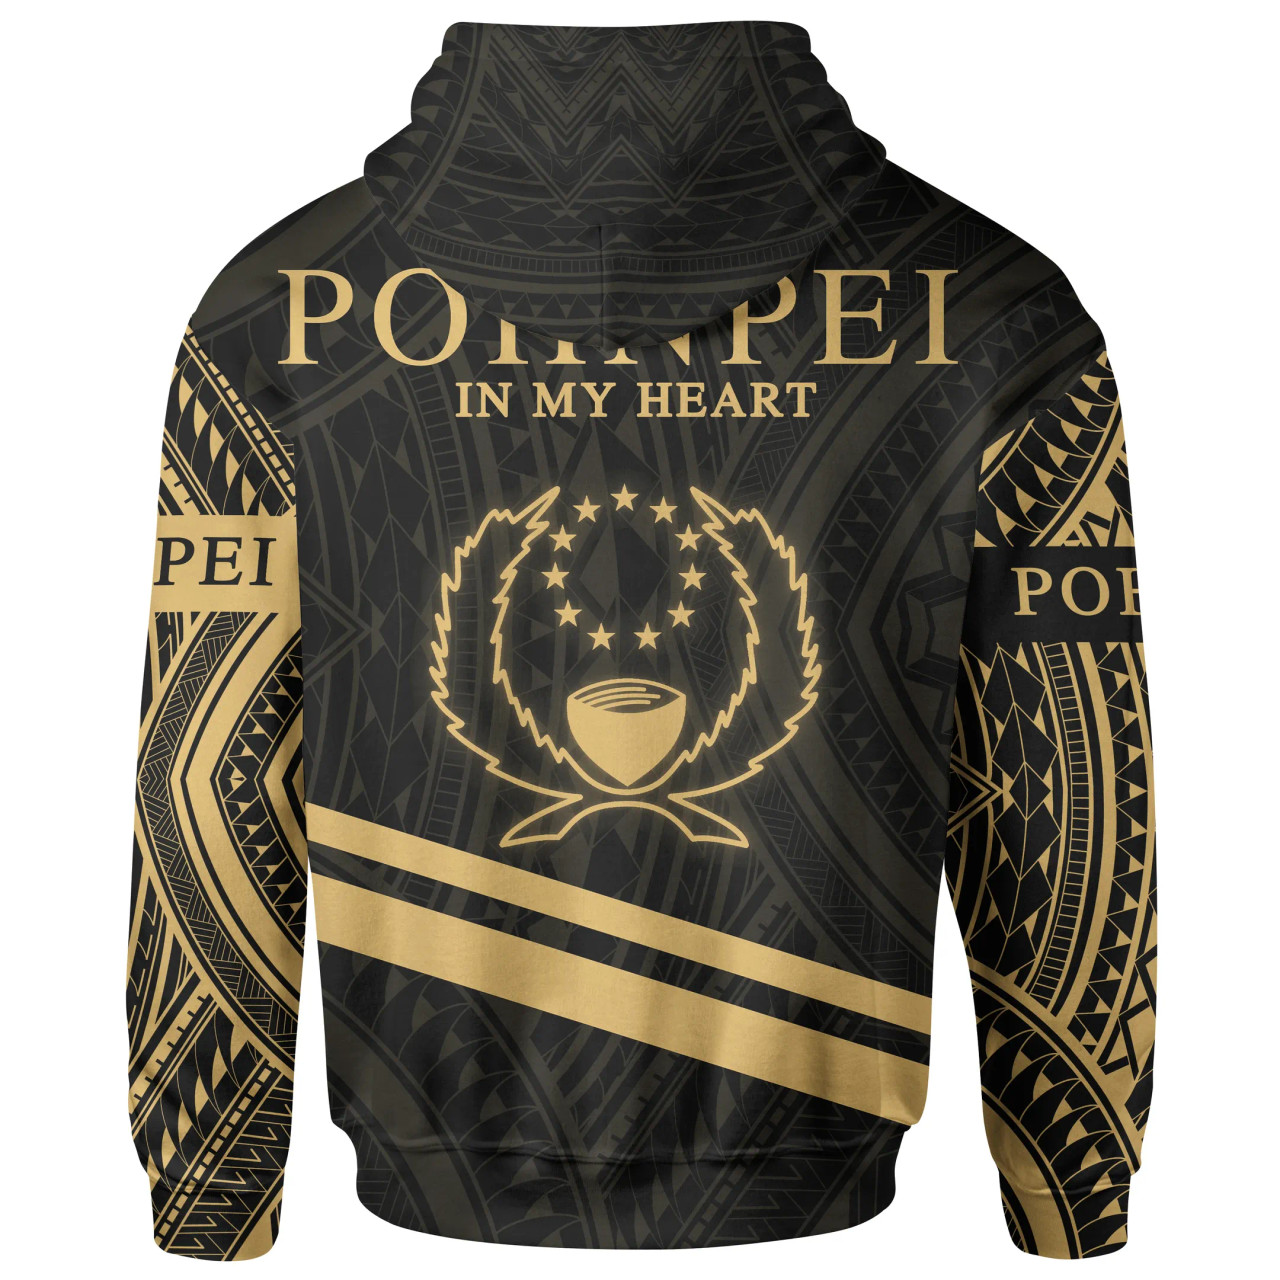 Pohnpei State Hoodie - In My Heart Style Gold Polynesian Patterns